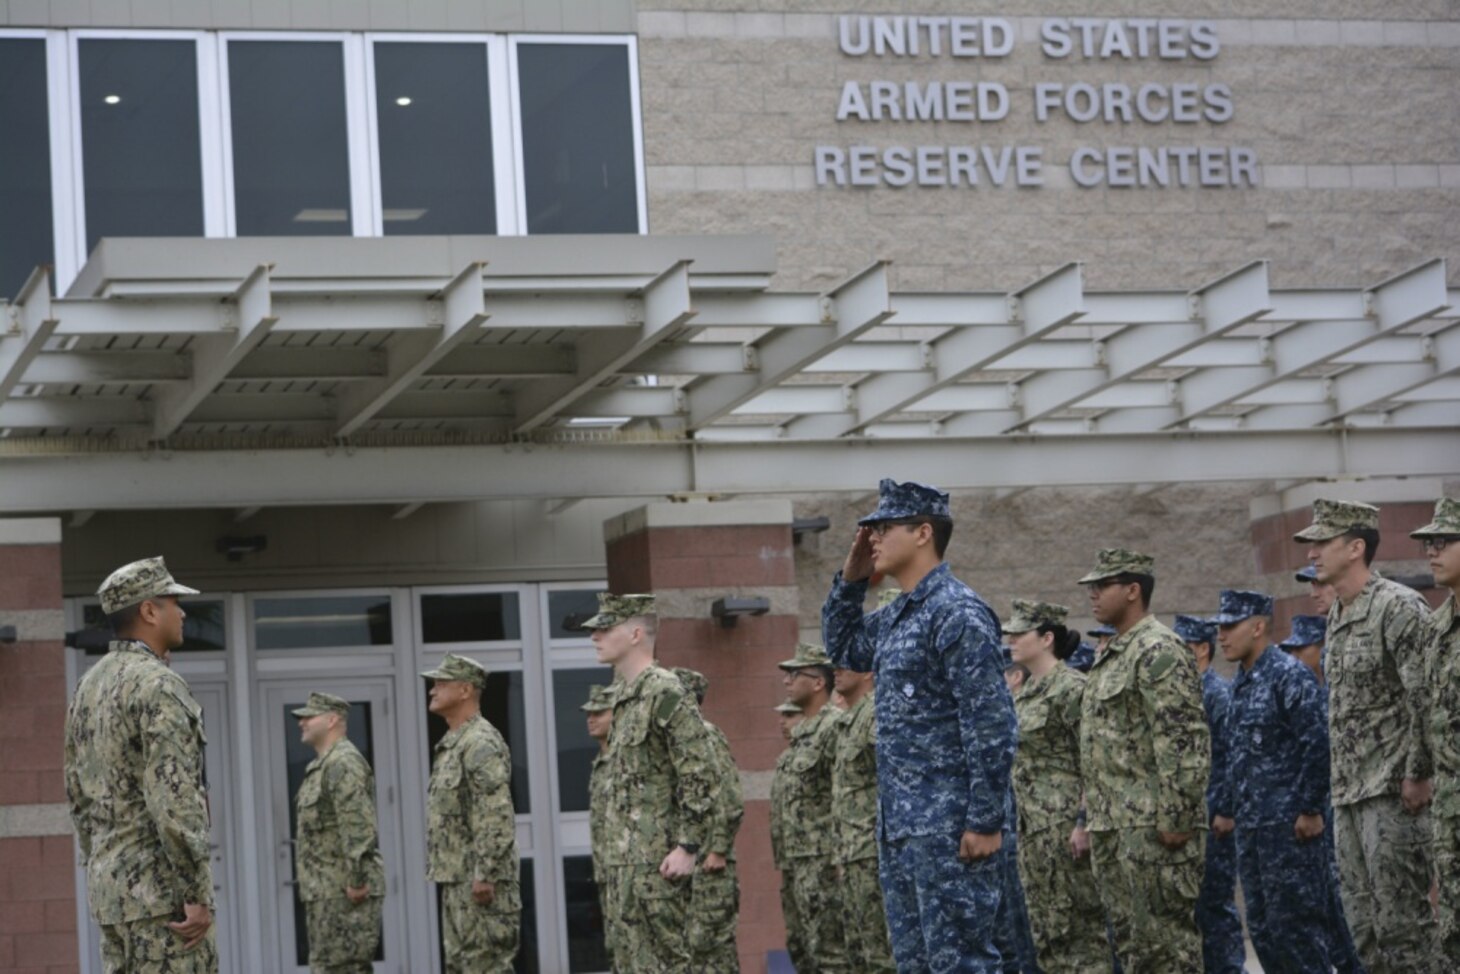 File Photo of U.S. Armed Forces Reserve Center